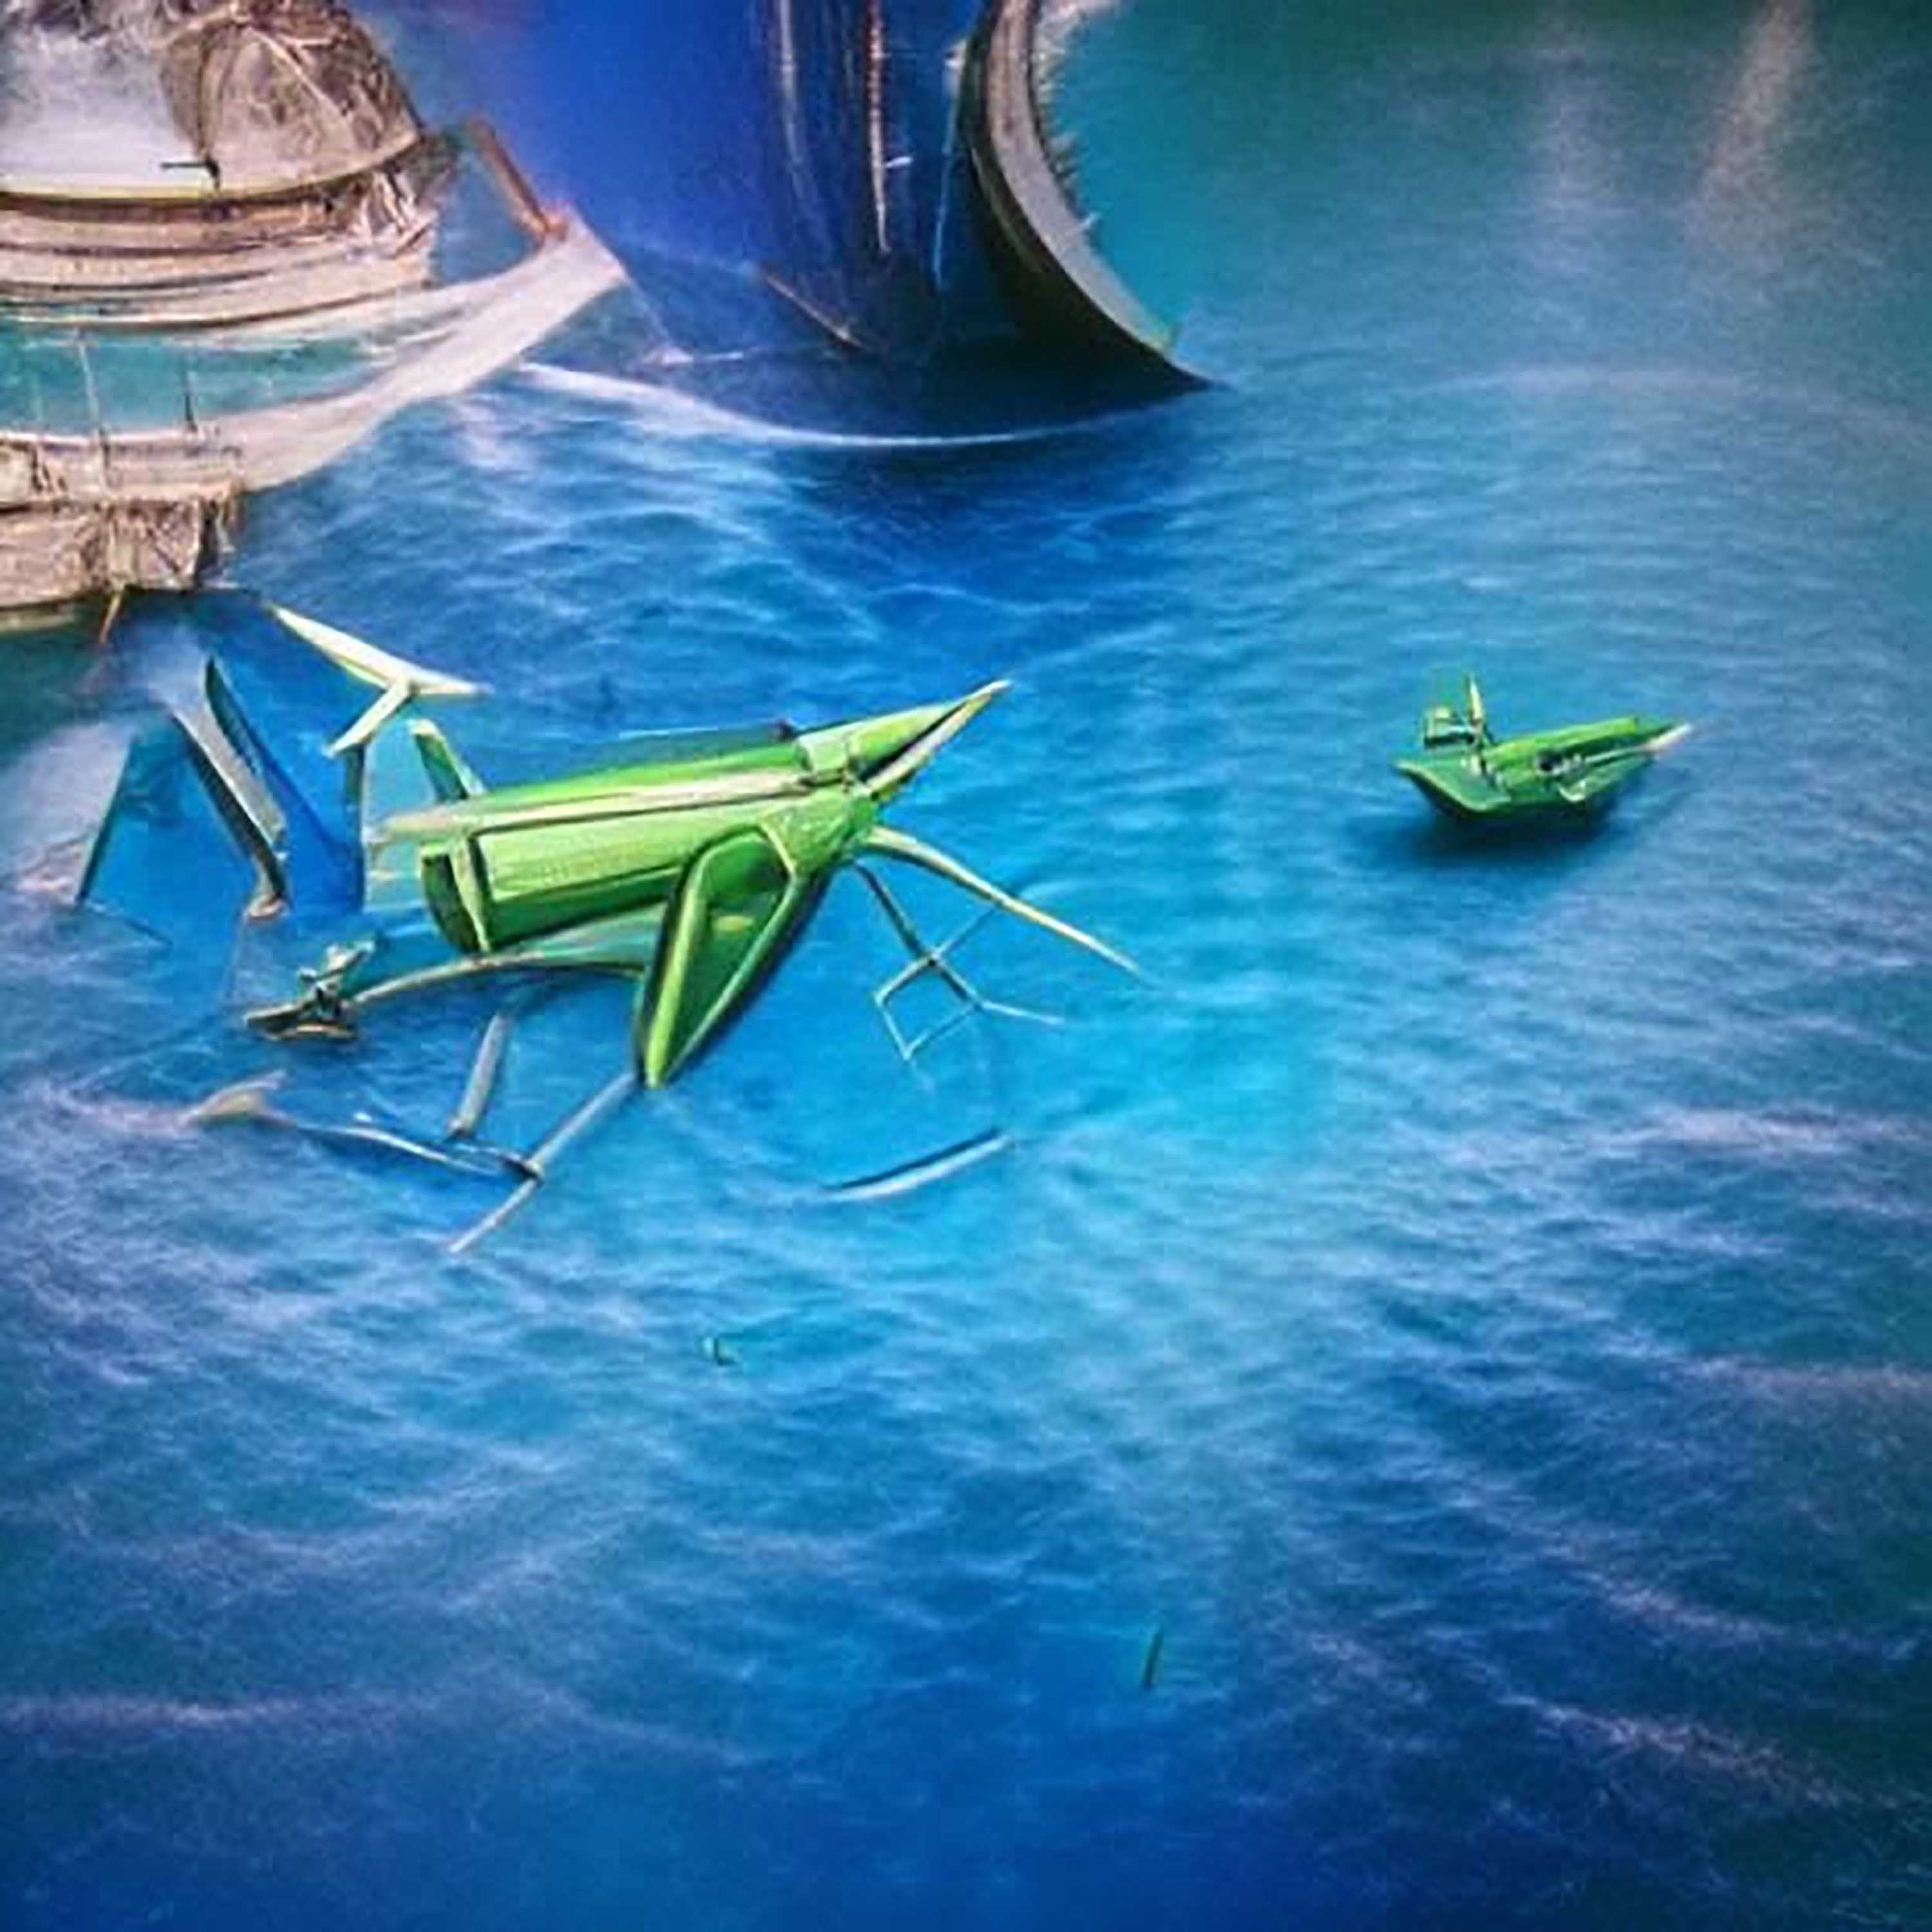 #115 - "the Mantis was green, the Mantis was blue, She abandoned ship before Atlantis because She knew they were screwed"